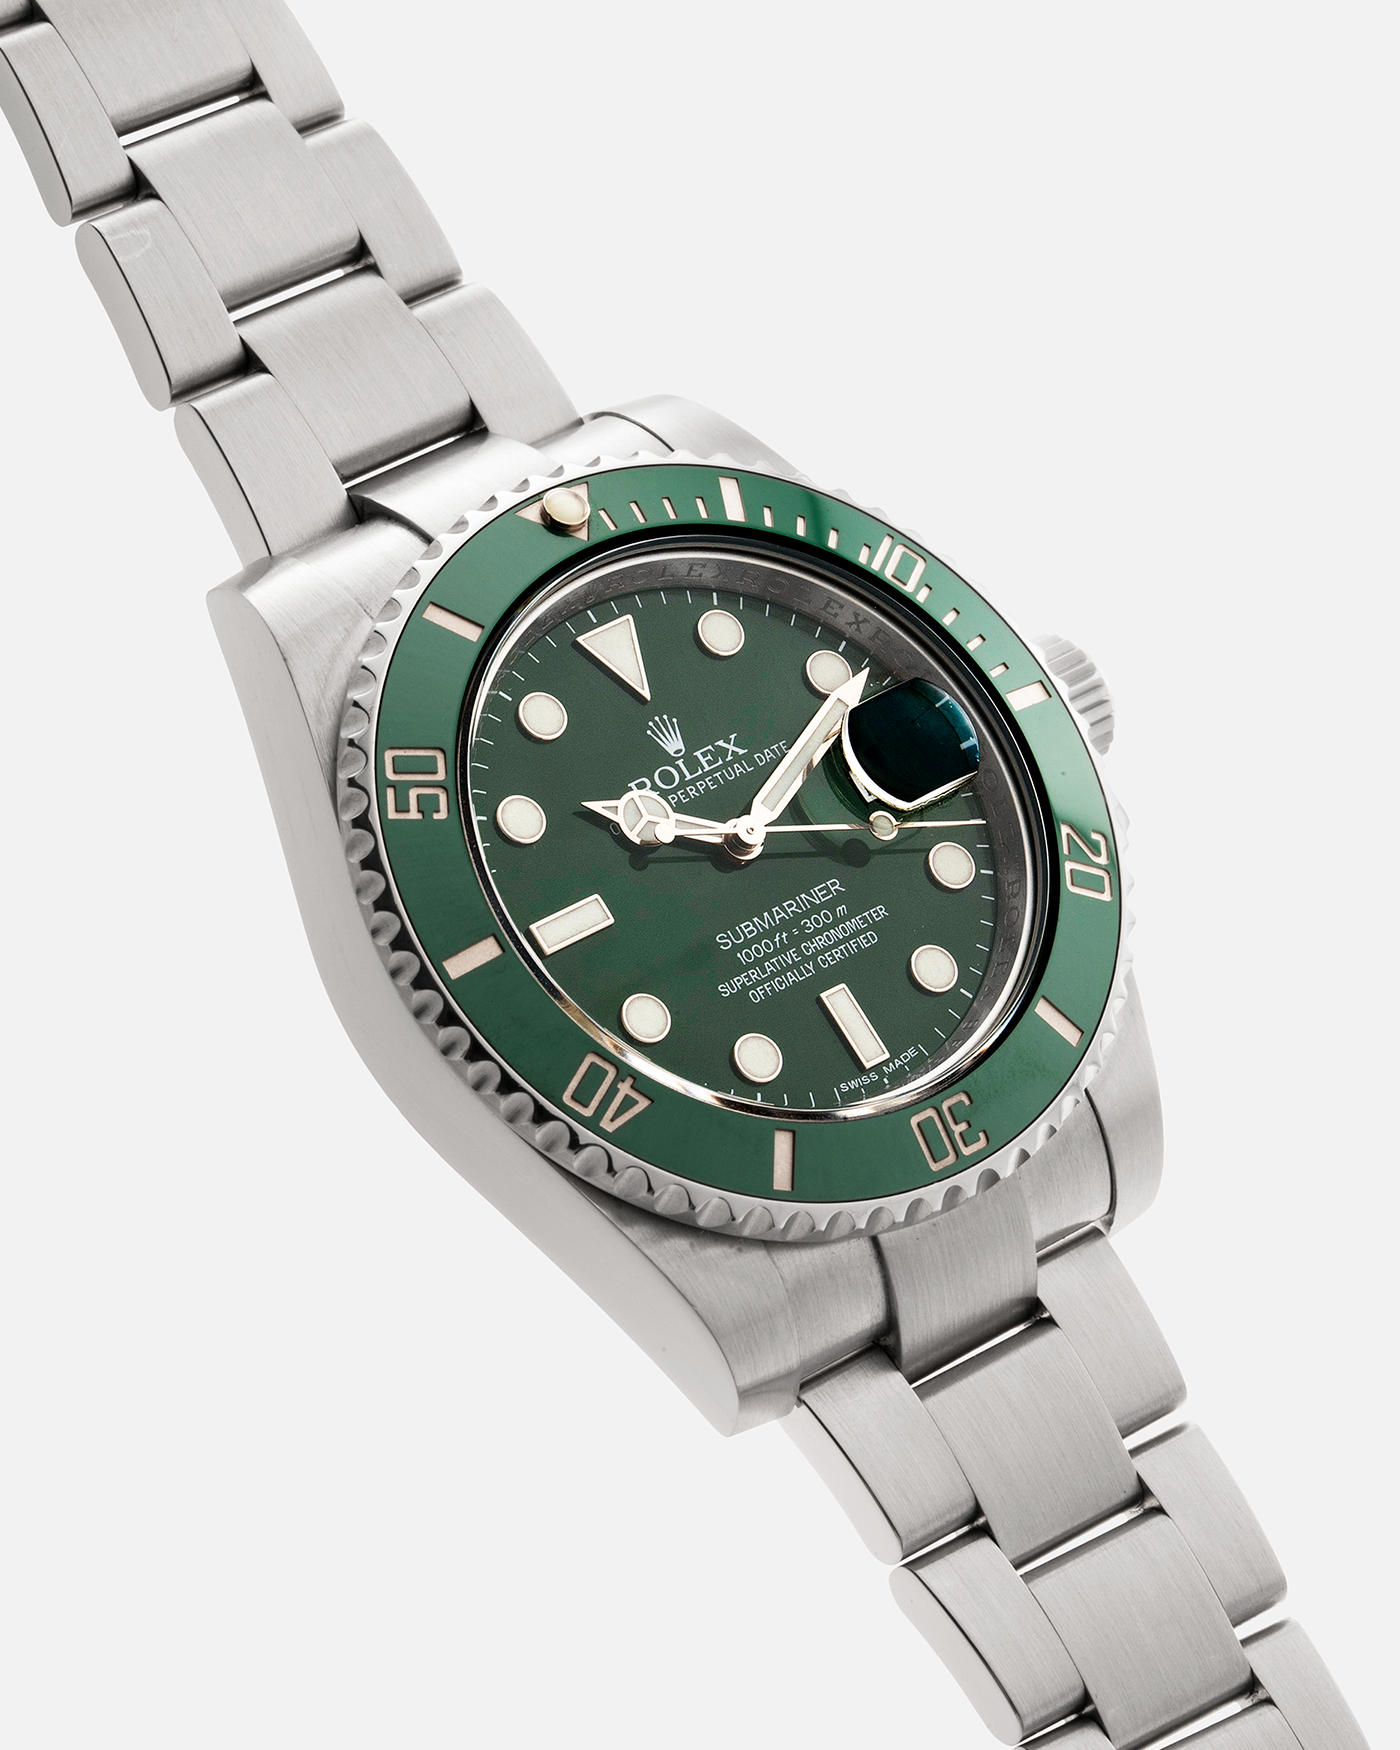 REFERENCE 116610LV SUBMARINER 'HULK' A STAINLESS